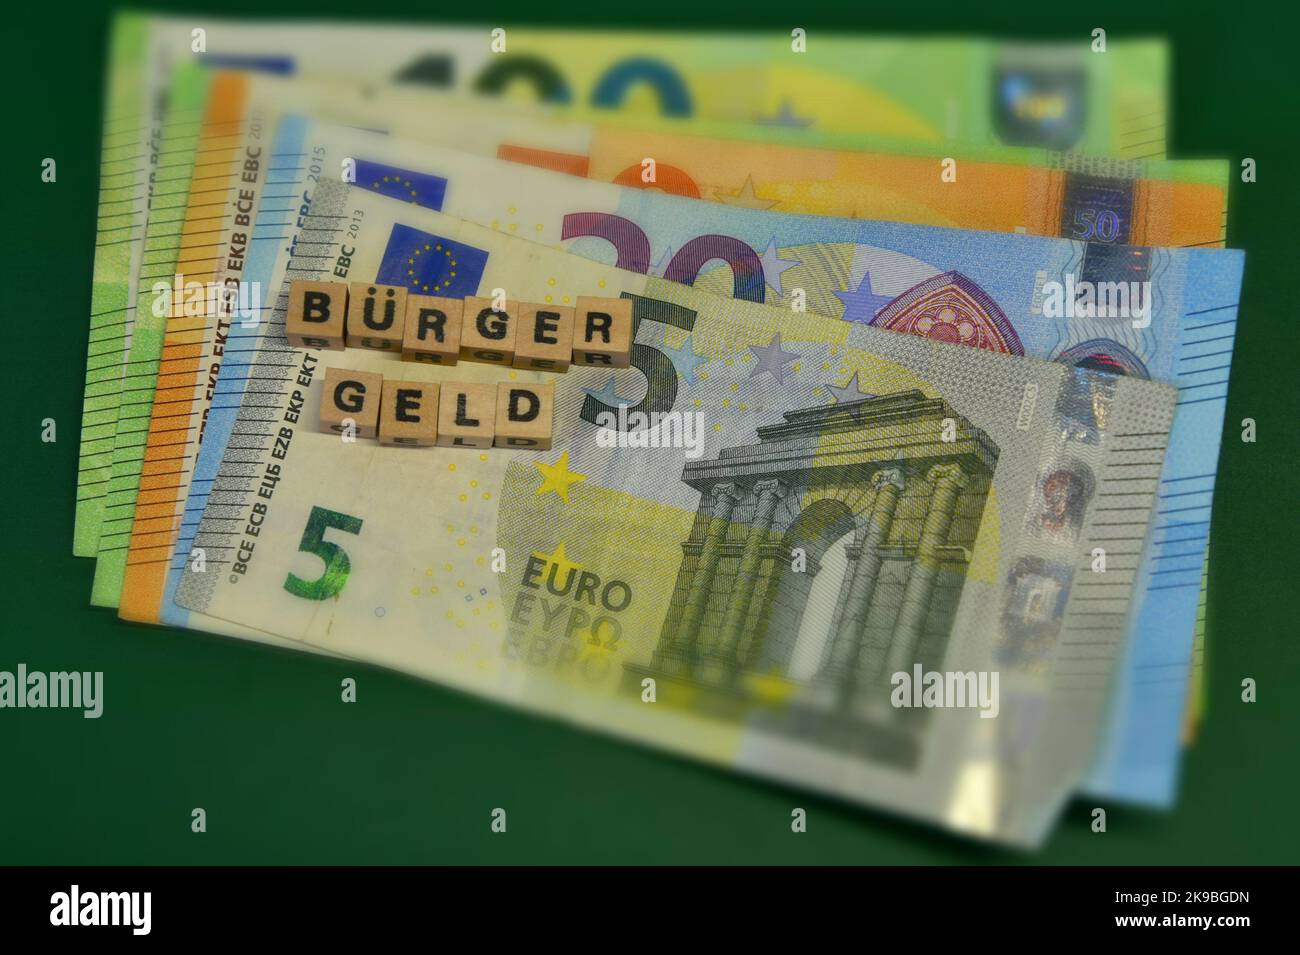 the german word Buergergeld and euro bank notes Stock Photo